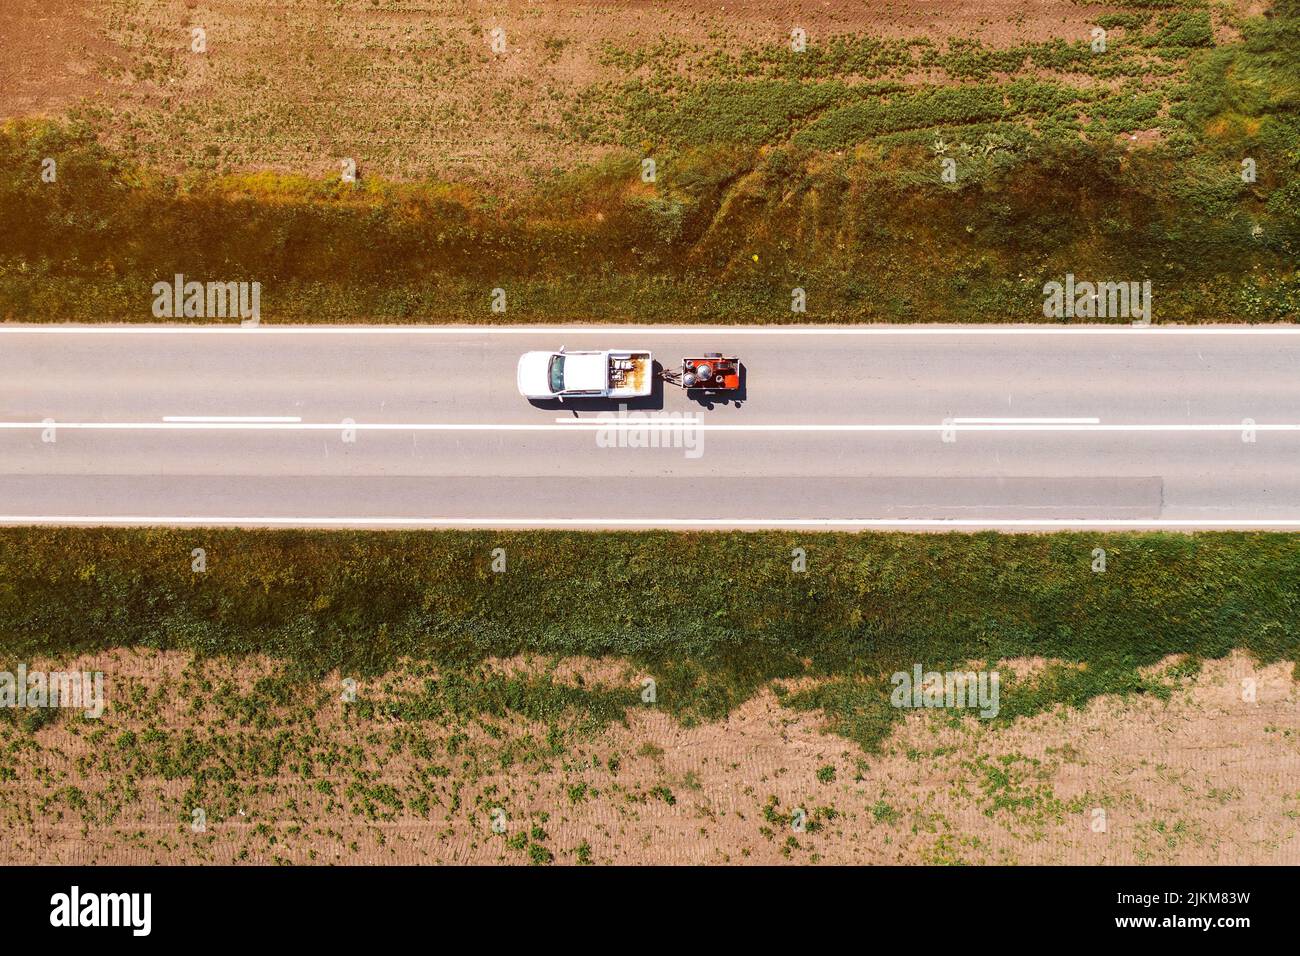 Aerial shot of pickup truck with trailer on highway through countryside landscape, drone pov directly above Stock Photo